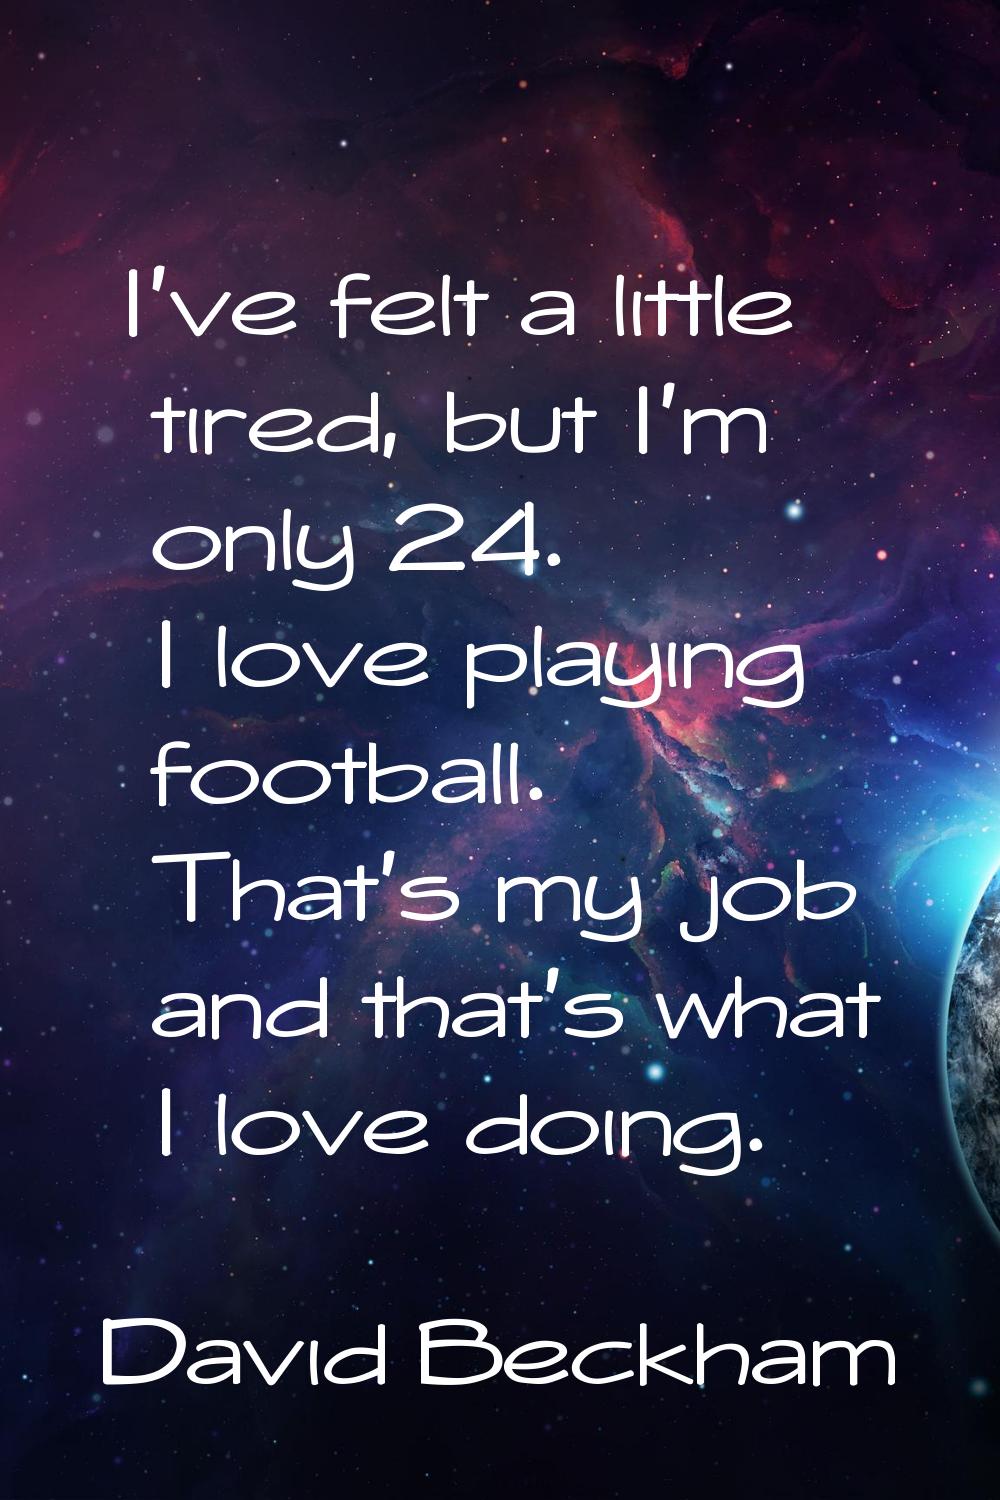 I've felt a little tired, but I'm only 24. I love playing football. That's my job and that's what I